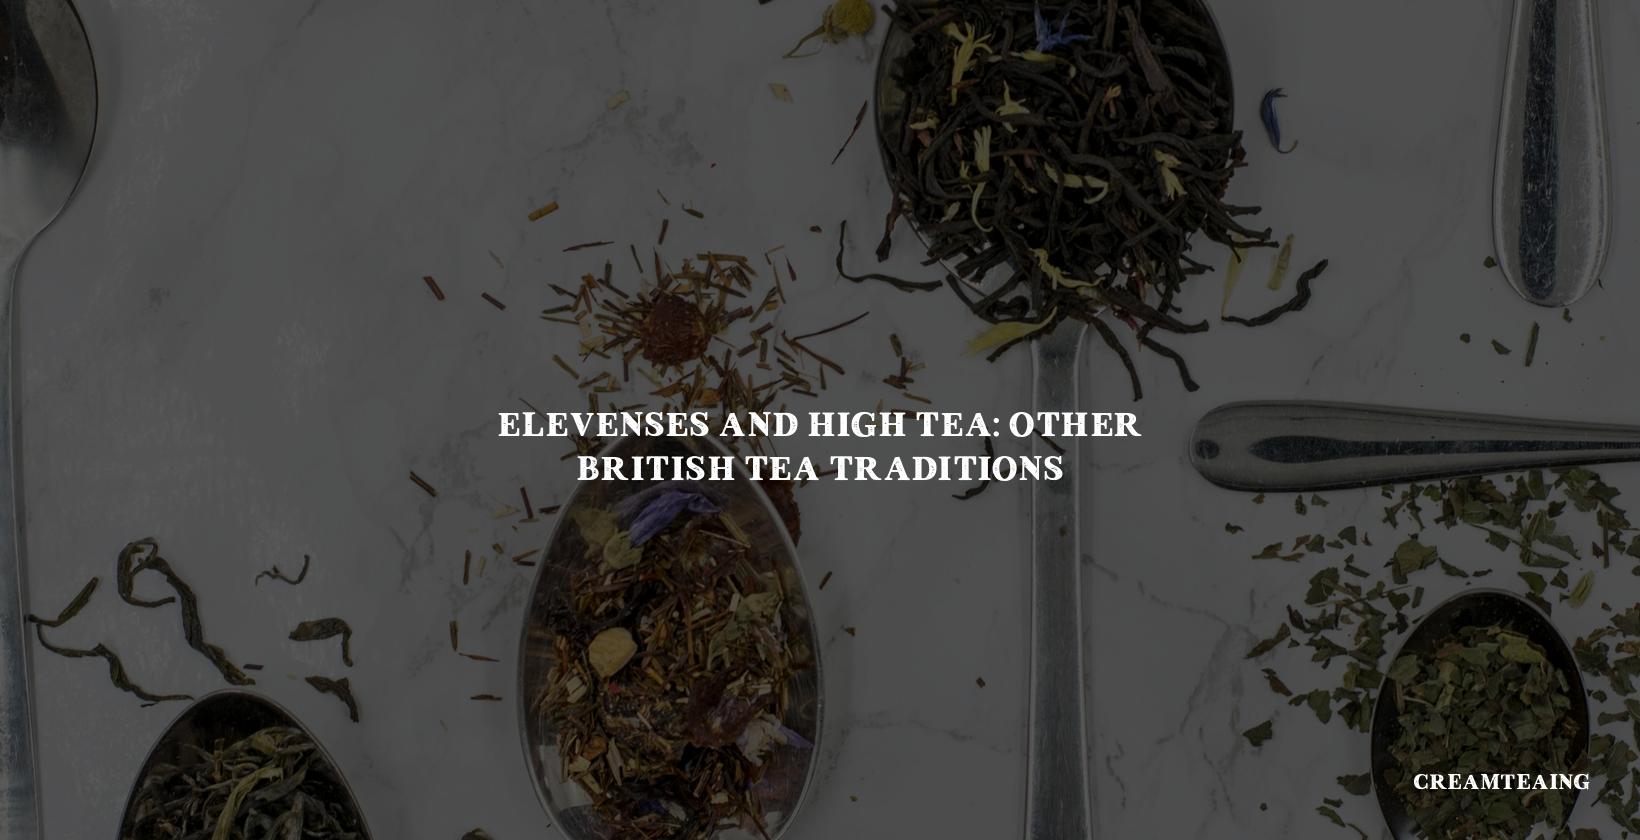 Elevenses and High Tea: Other British Tea Traditions